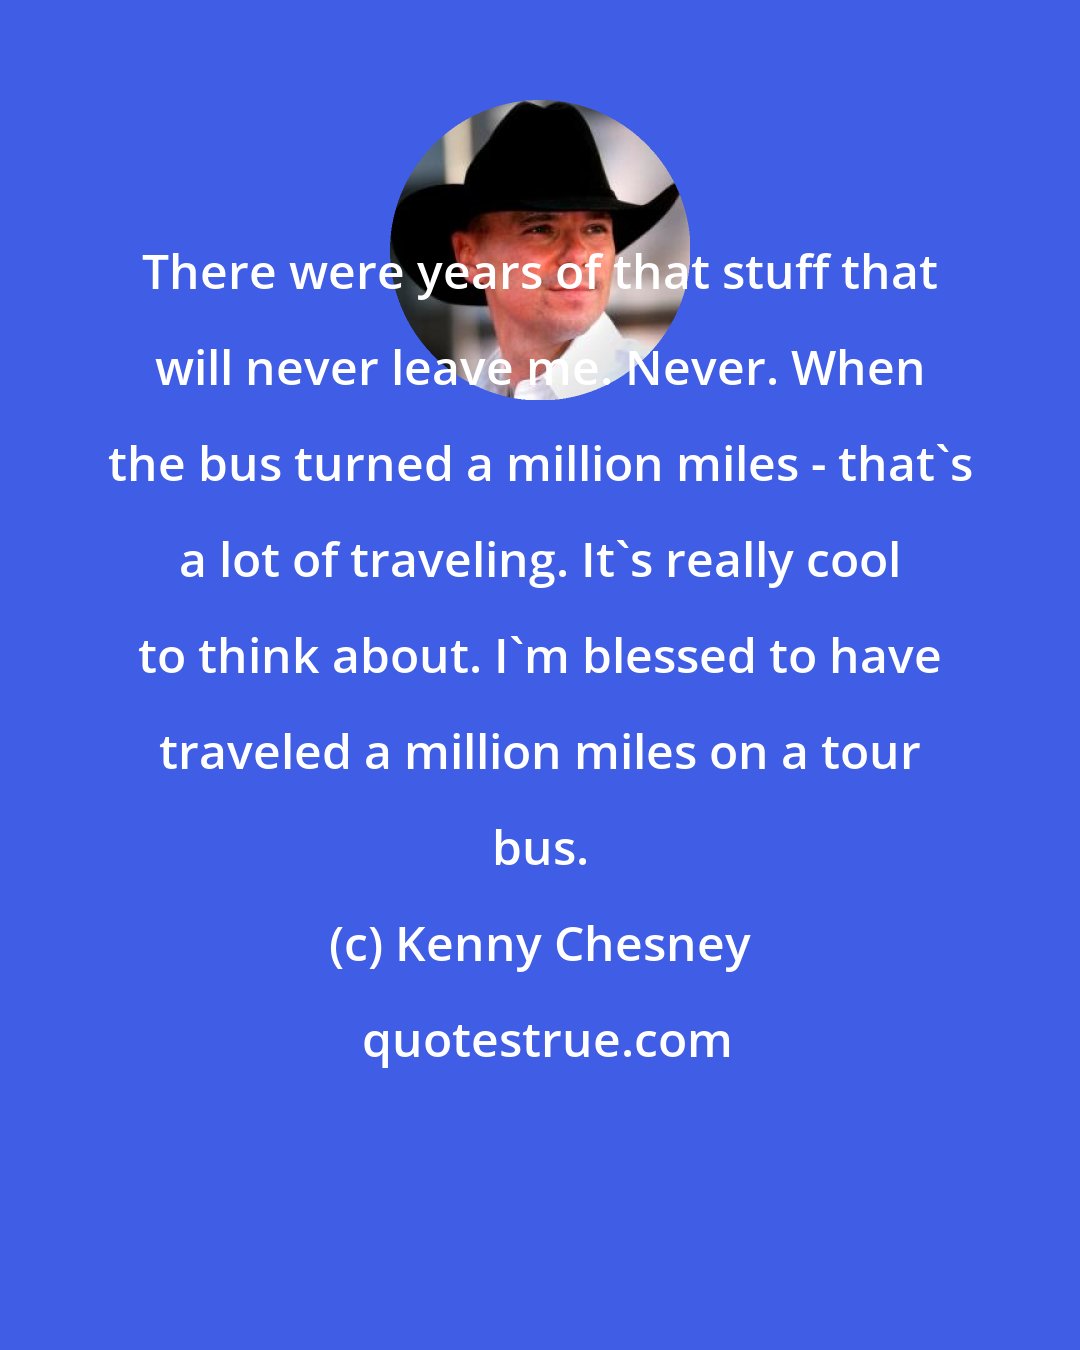 Kenny Chesney: There were years of that stuff that will never leave me. Never. When the bus turned a million miles - that's a lot of traveling. It's really cool to think about. I'm blessed to have traveled a million miles on a tour bus.